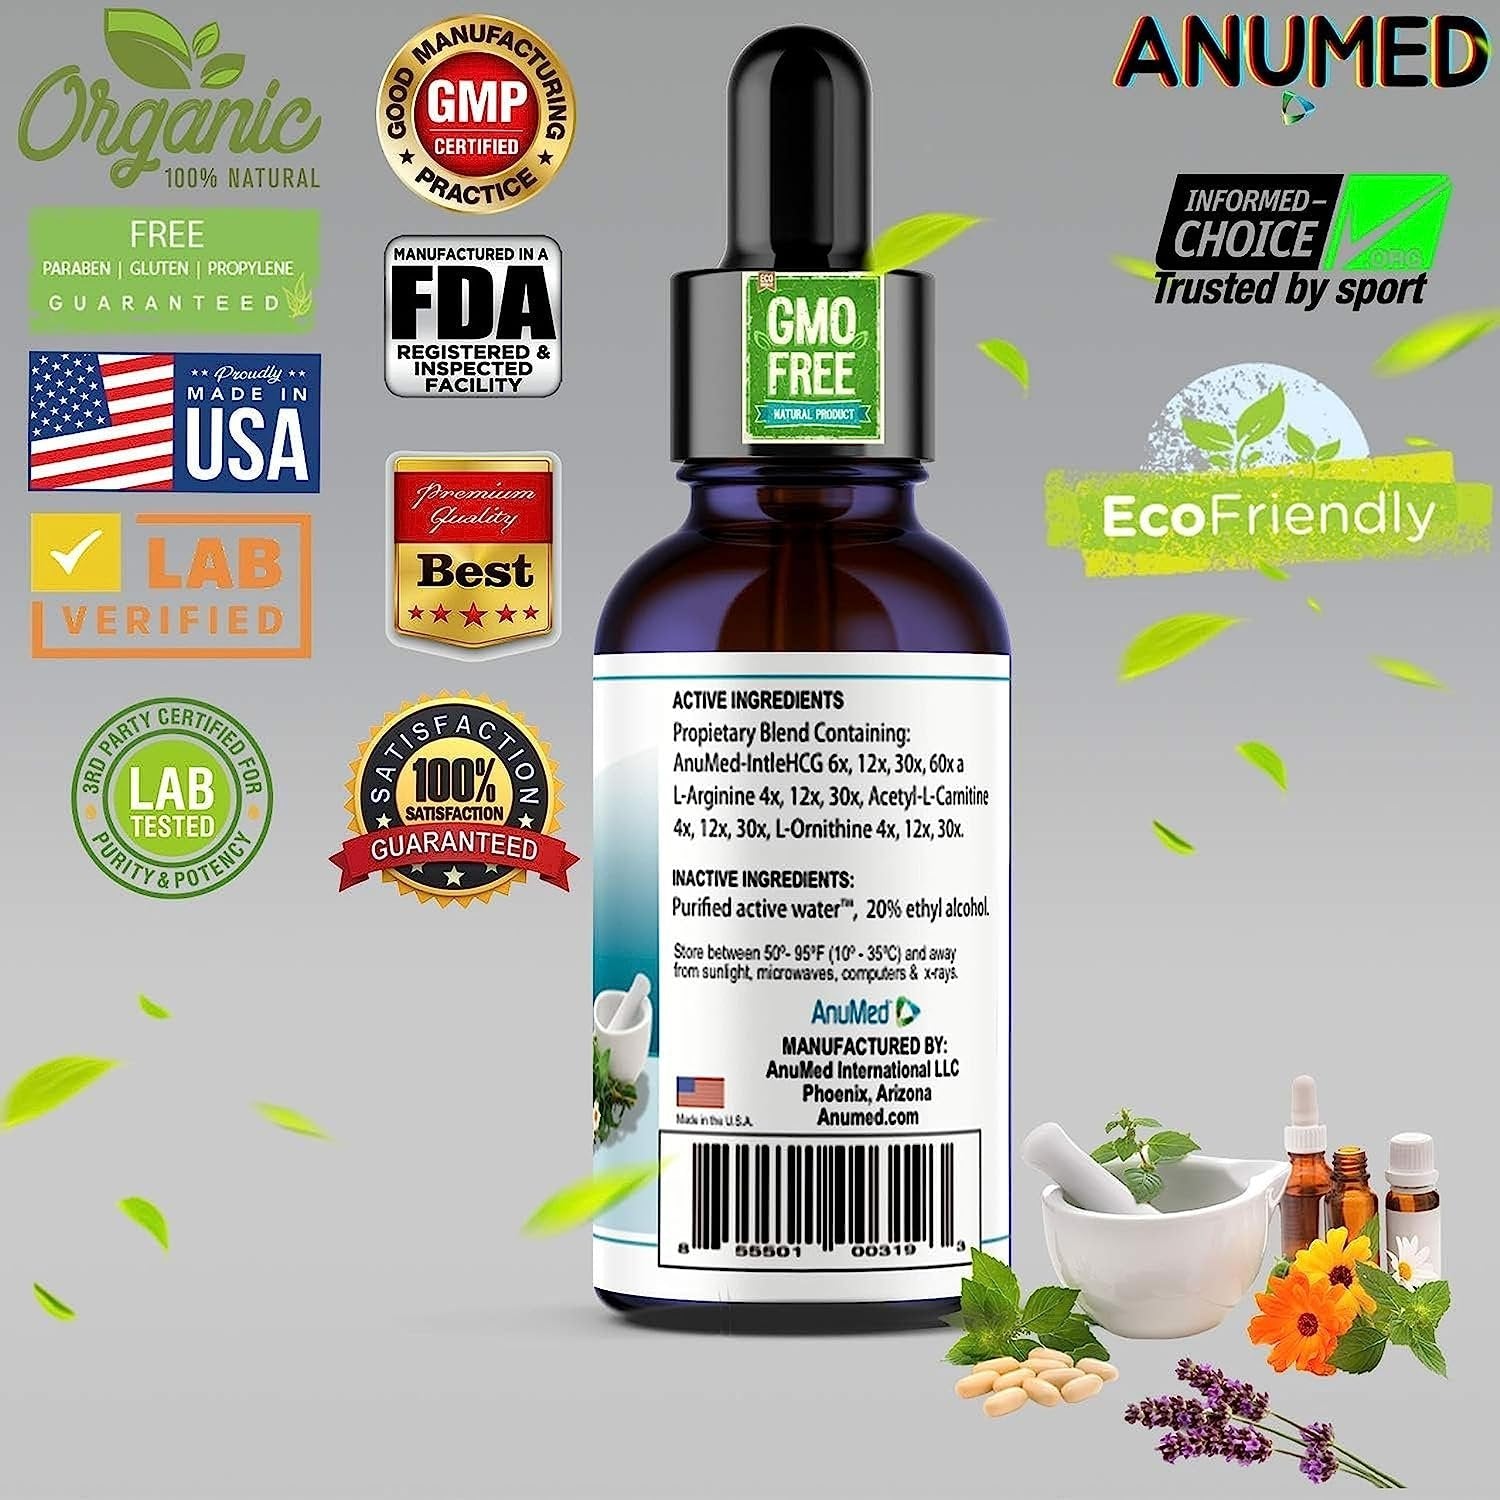 Worldwide Nutrition Anumed e-Drops - Metabolism, Control Hunger, Fast Transformation Healthy Weight Loss Drops - Natural Vegan, Keto Friendly for Women & Men (1oz) with Bonus Multi-Purpose Key Chain